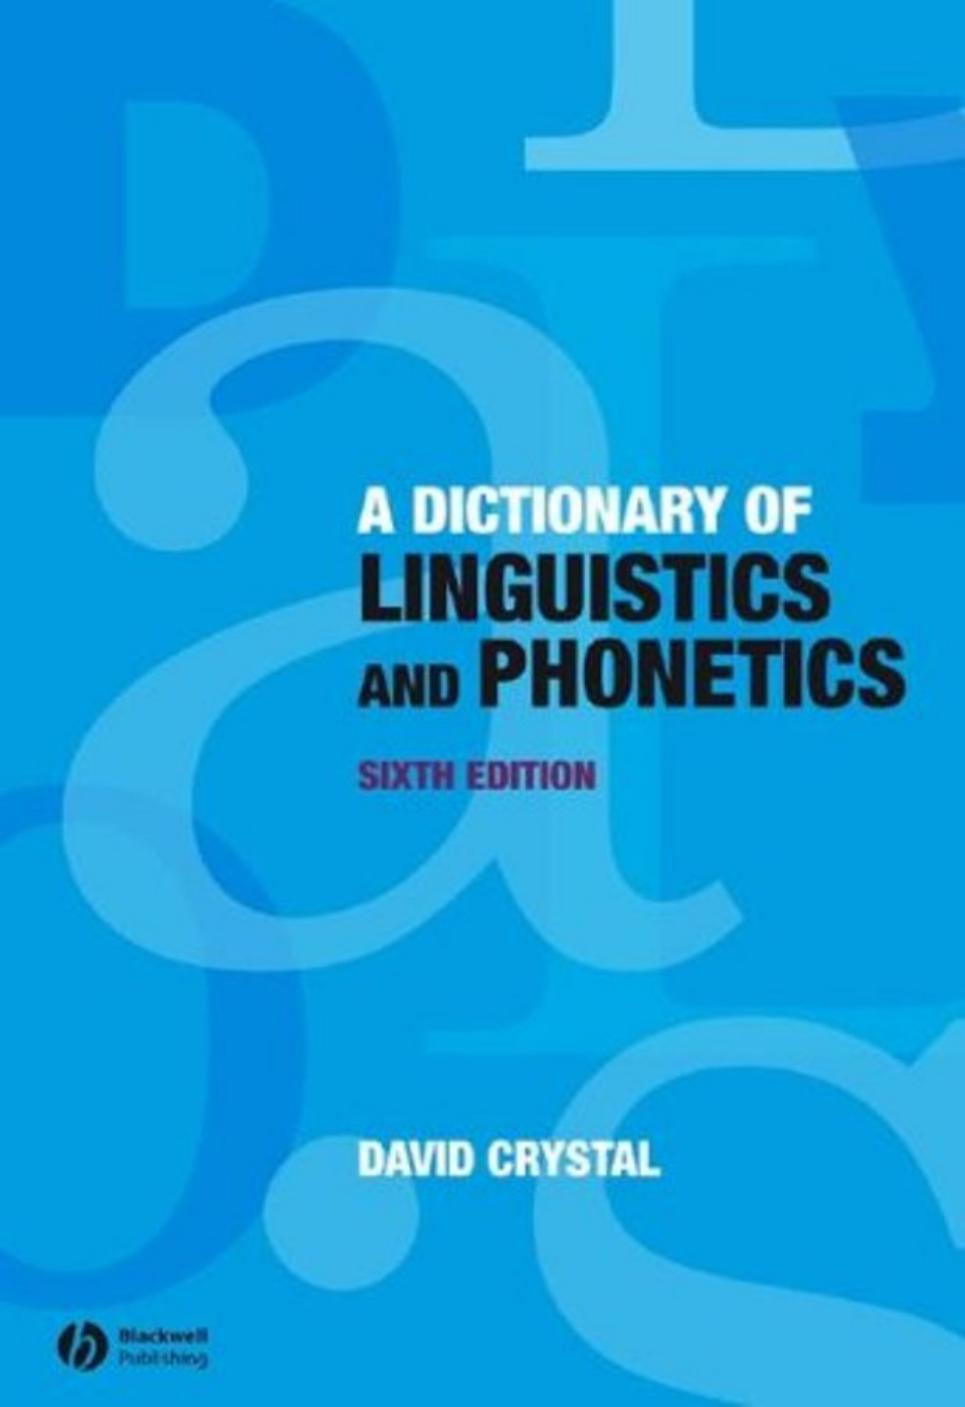 A dictionary of linguistics and phonetics-Wiley-Blackwell (2008)